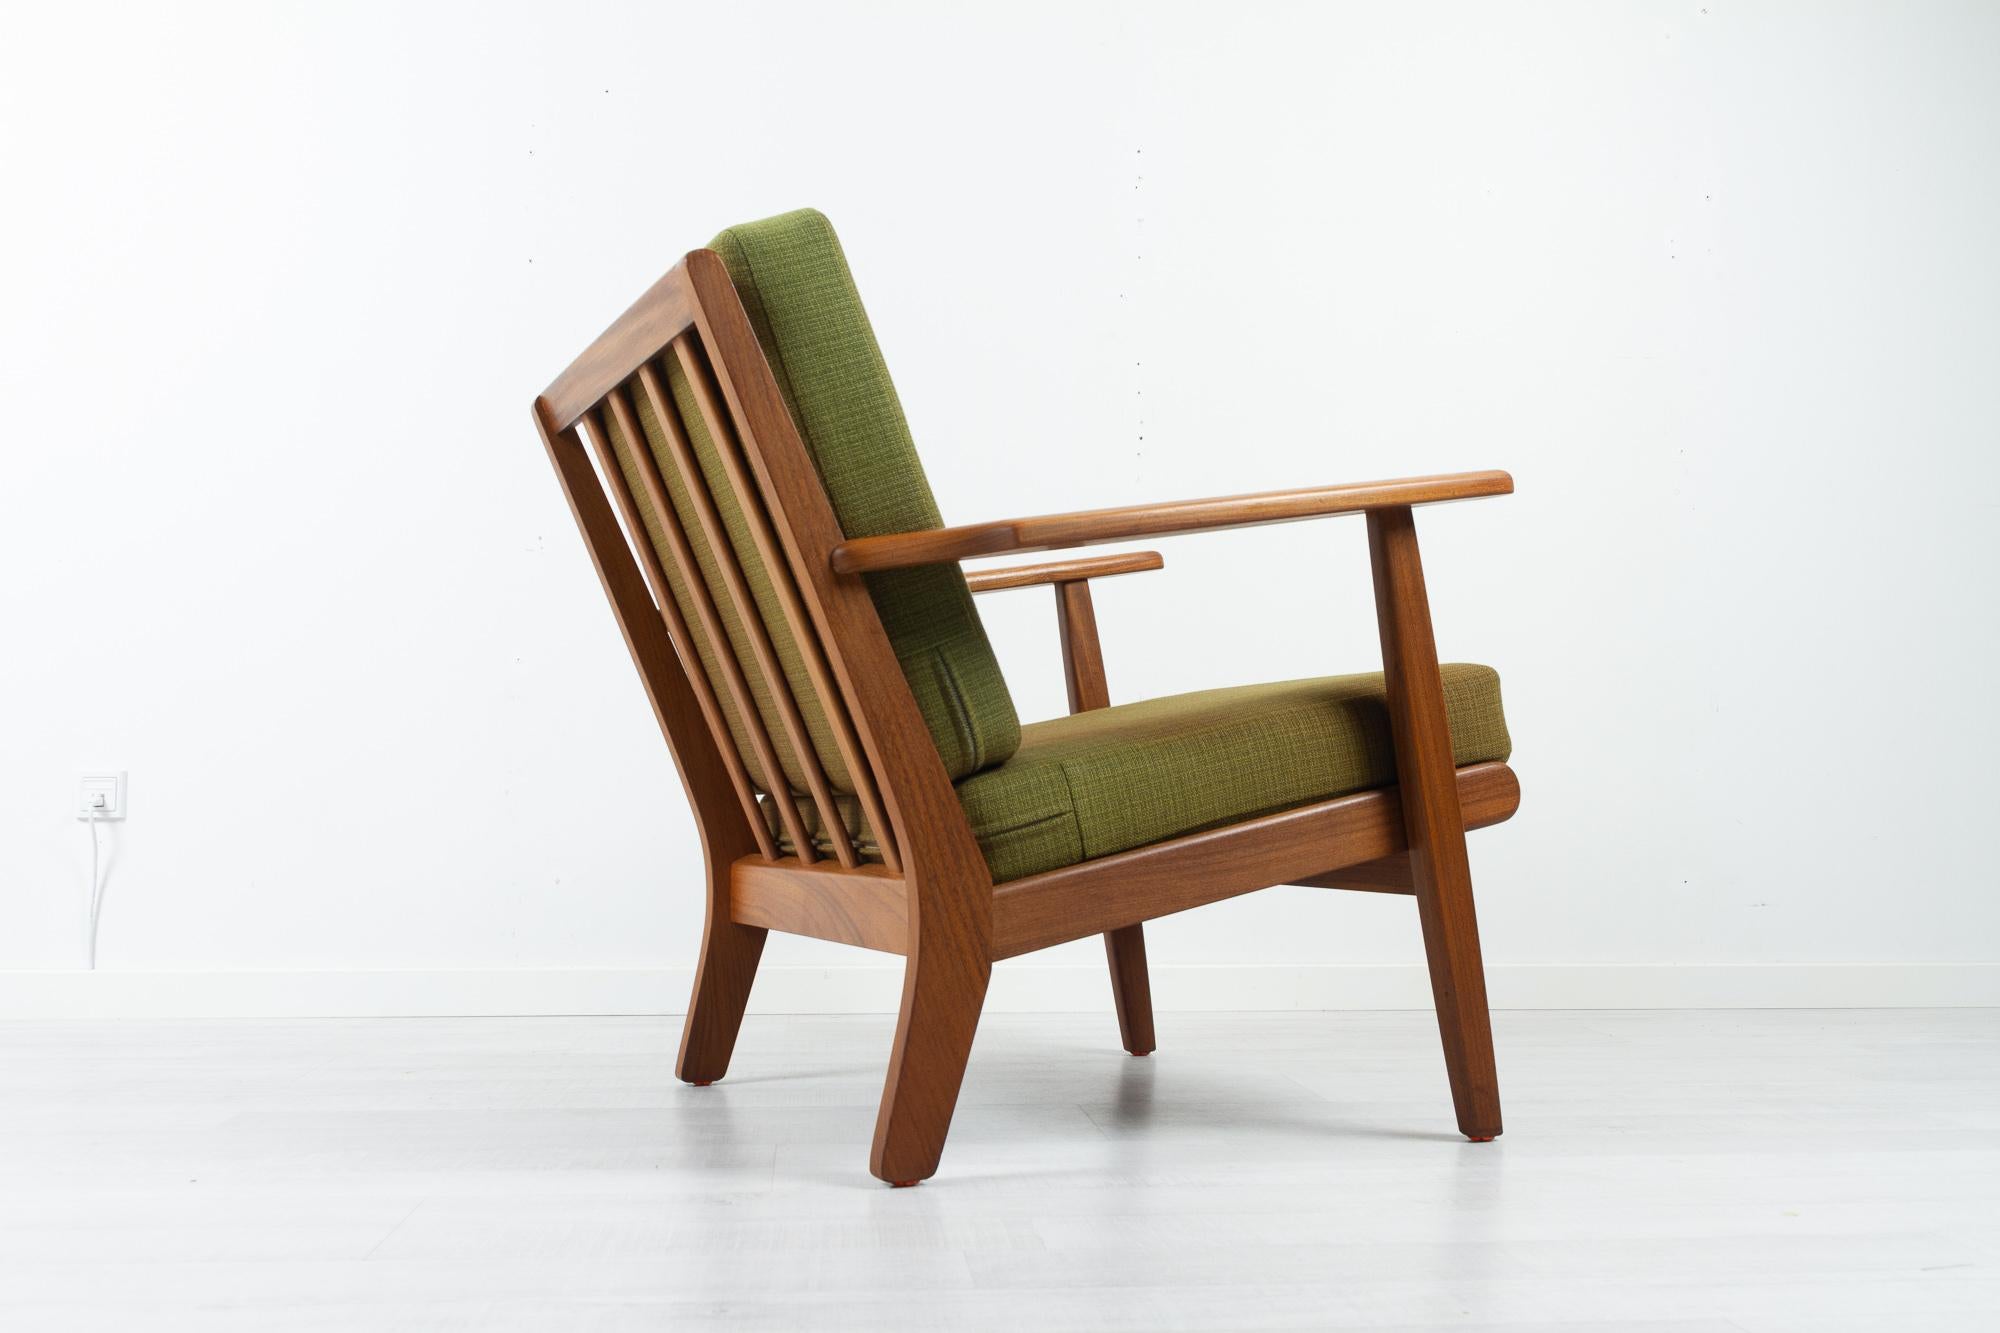 Vintage Danish lounge chair GE-88 by Aage Pedersen for GETAMA Denmark 1960s.
Danish modern lounge chair model GE88 designed by the owner of the GETAMA furniture factory Aage Pedersen. 
This easy chair is made in solid teak with Epeda spring